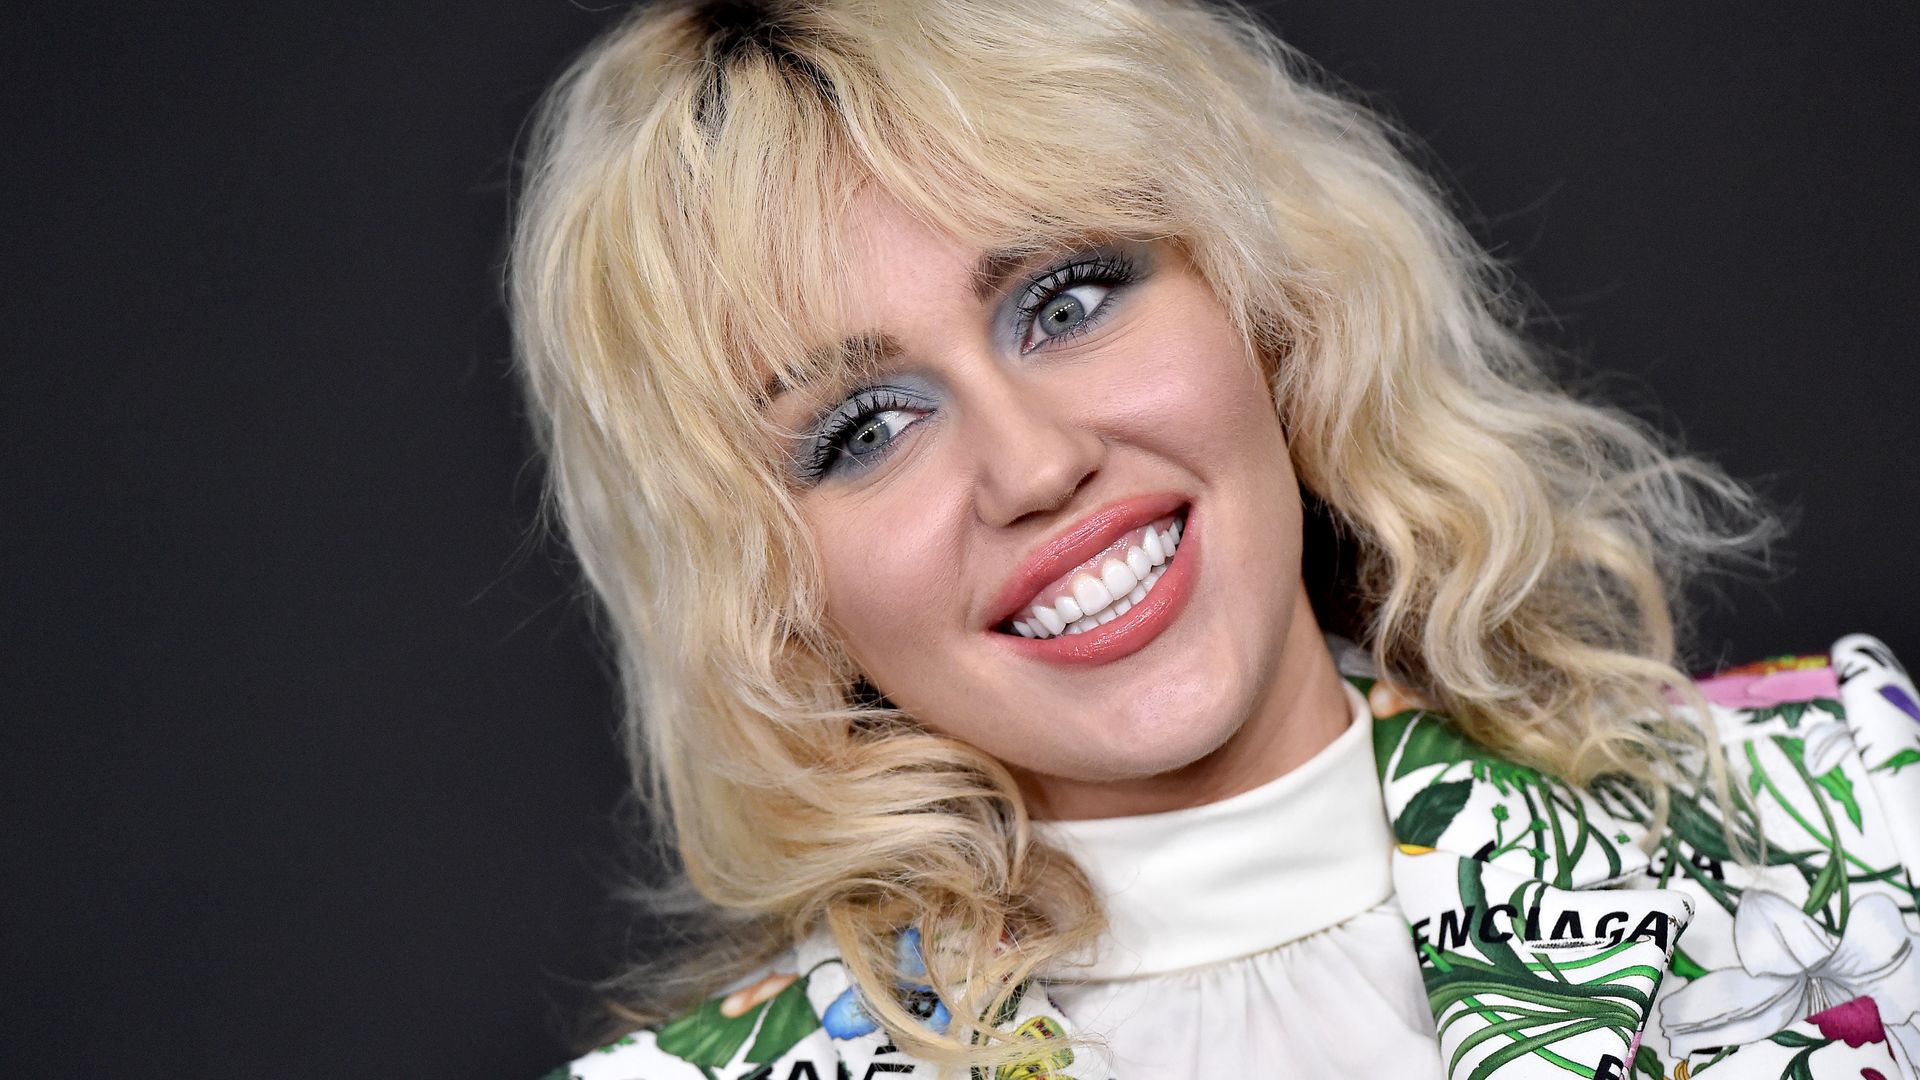 Miley Cyrus' major hair transformation has fans doing a double take